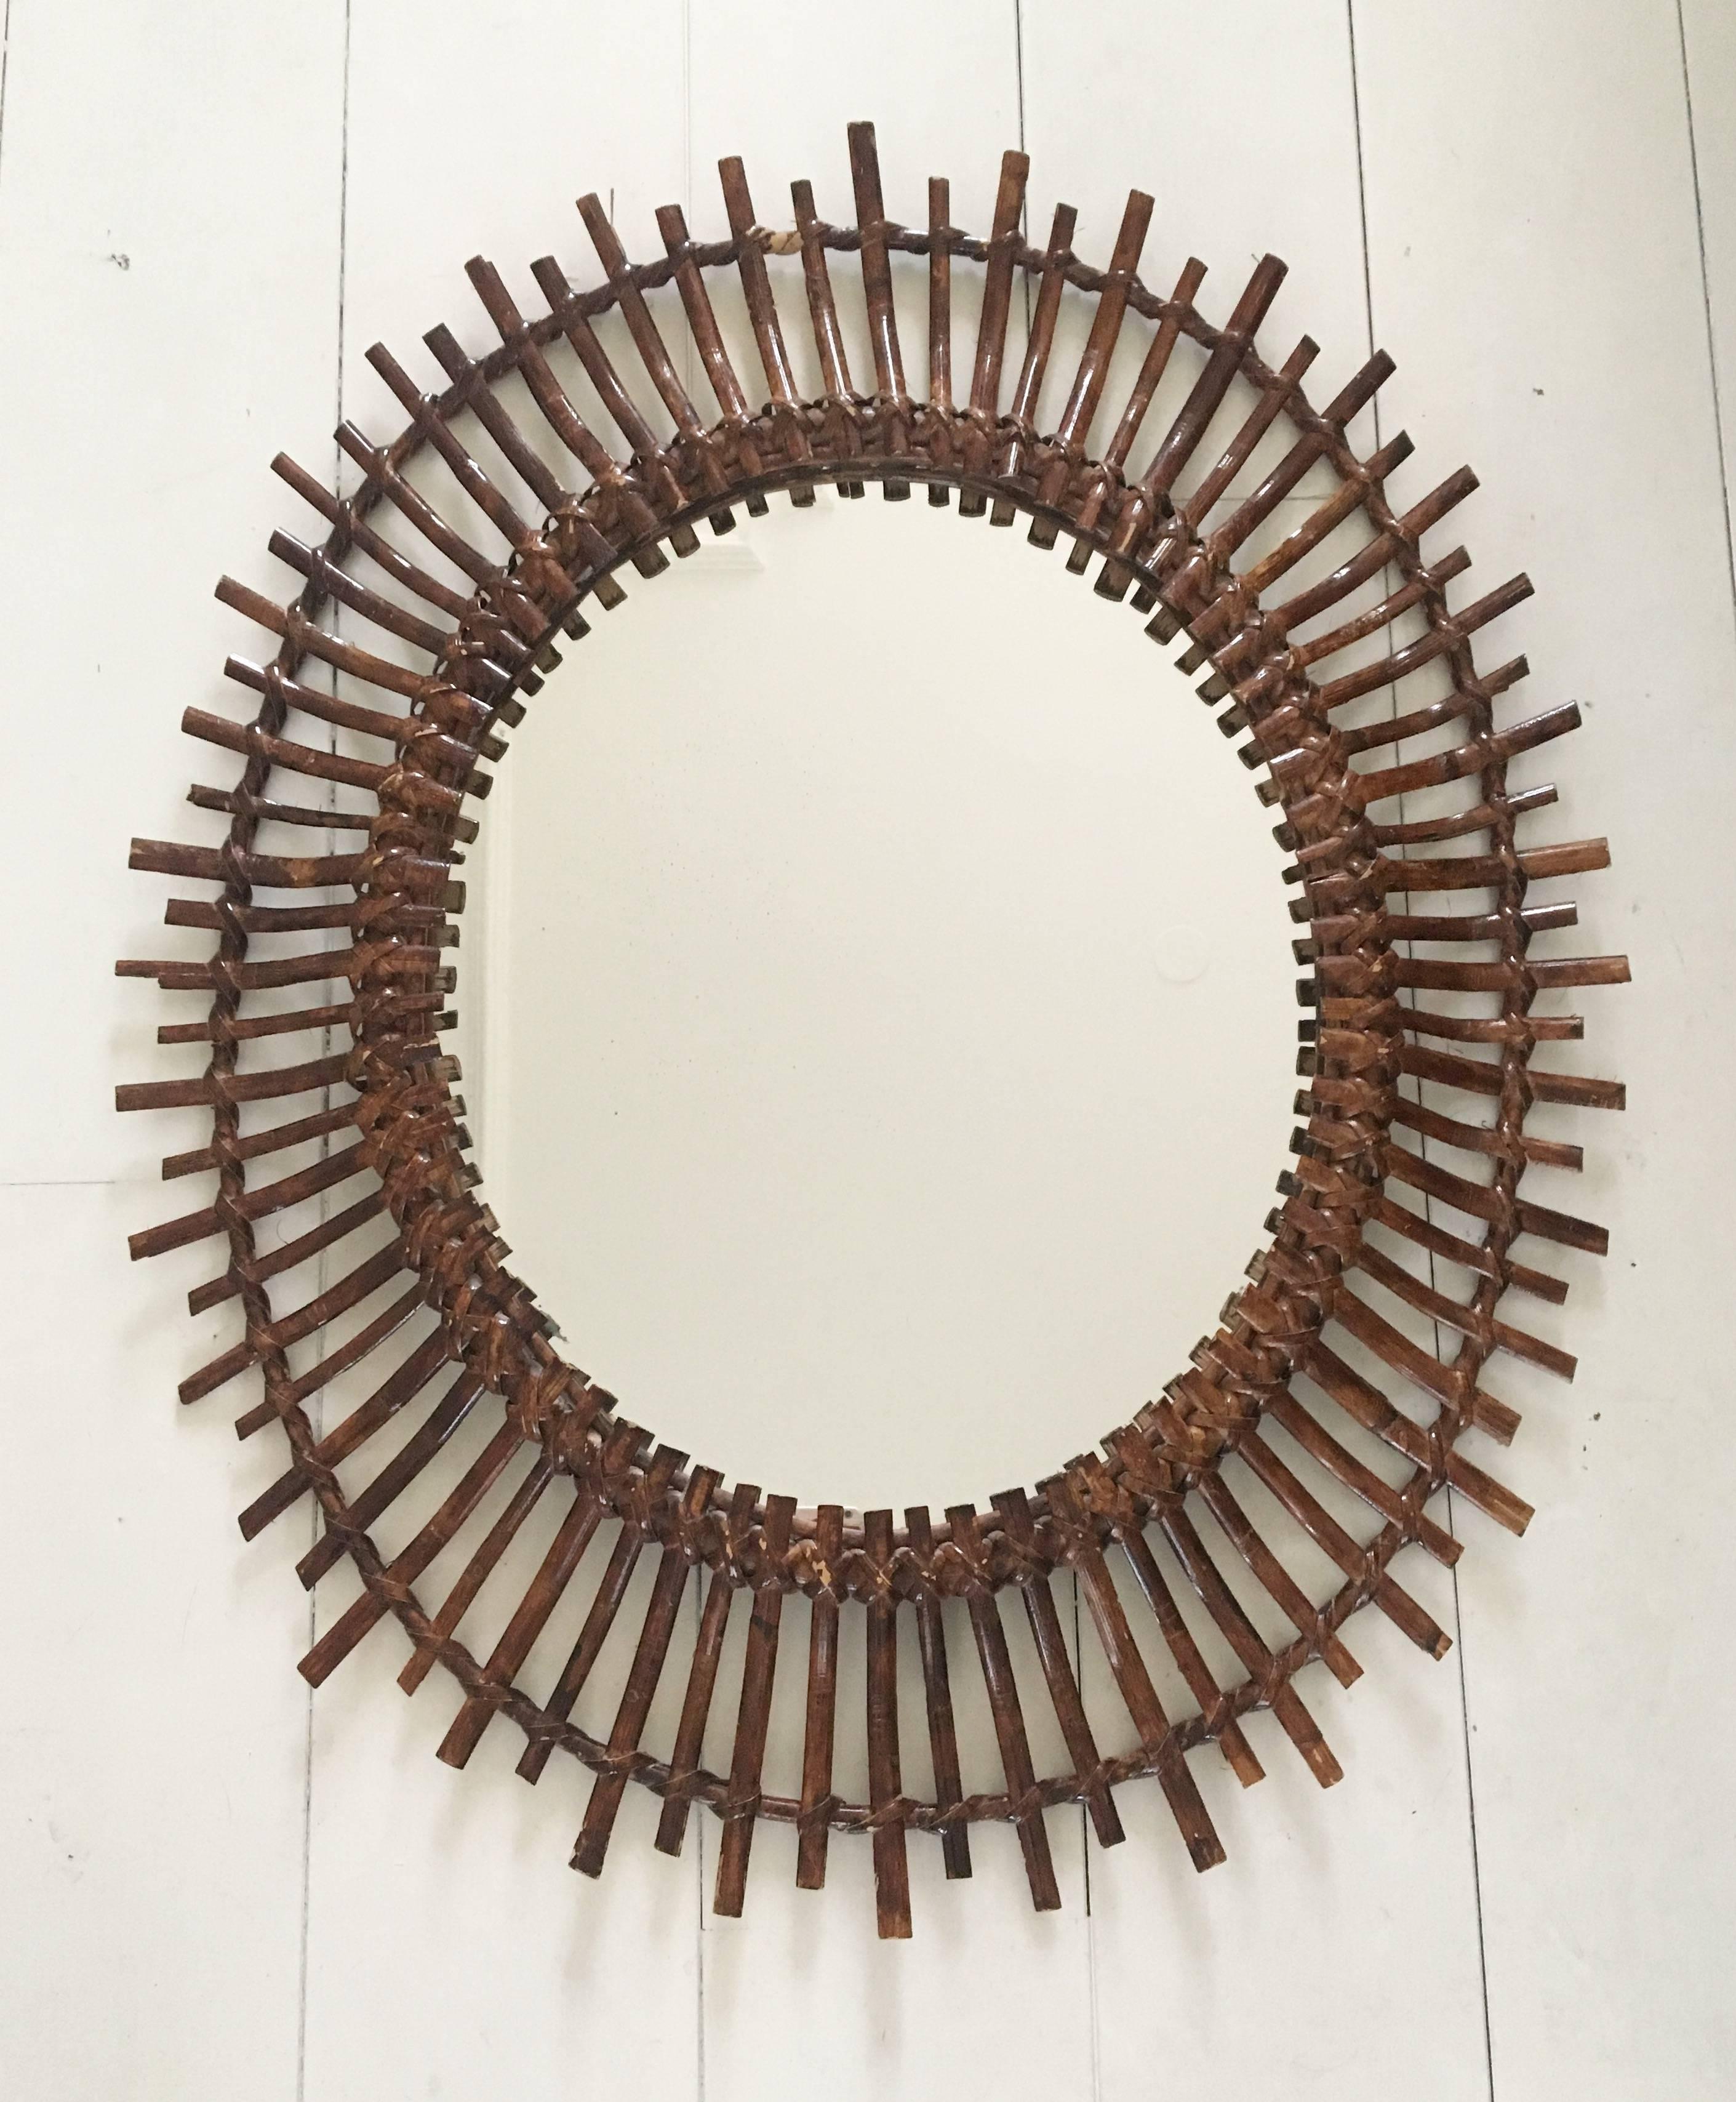 Elegantly handcrafted rattan or wicker sunburst mirror with oval shape, in the style of Franco Albini. The mirror features a row of curved beams in different lengths and is finished with a coat lacquer. The back of the mirror, features a leather